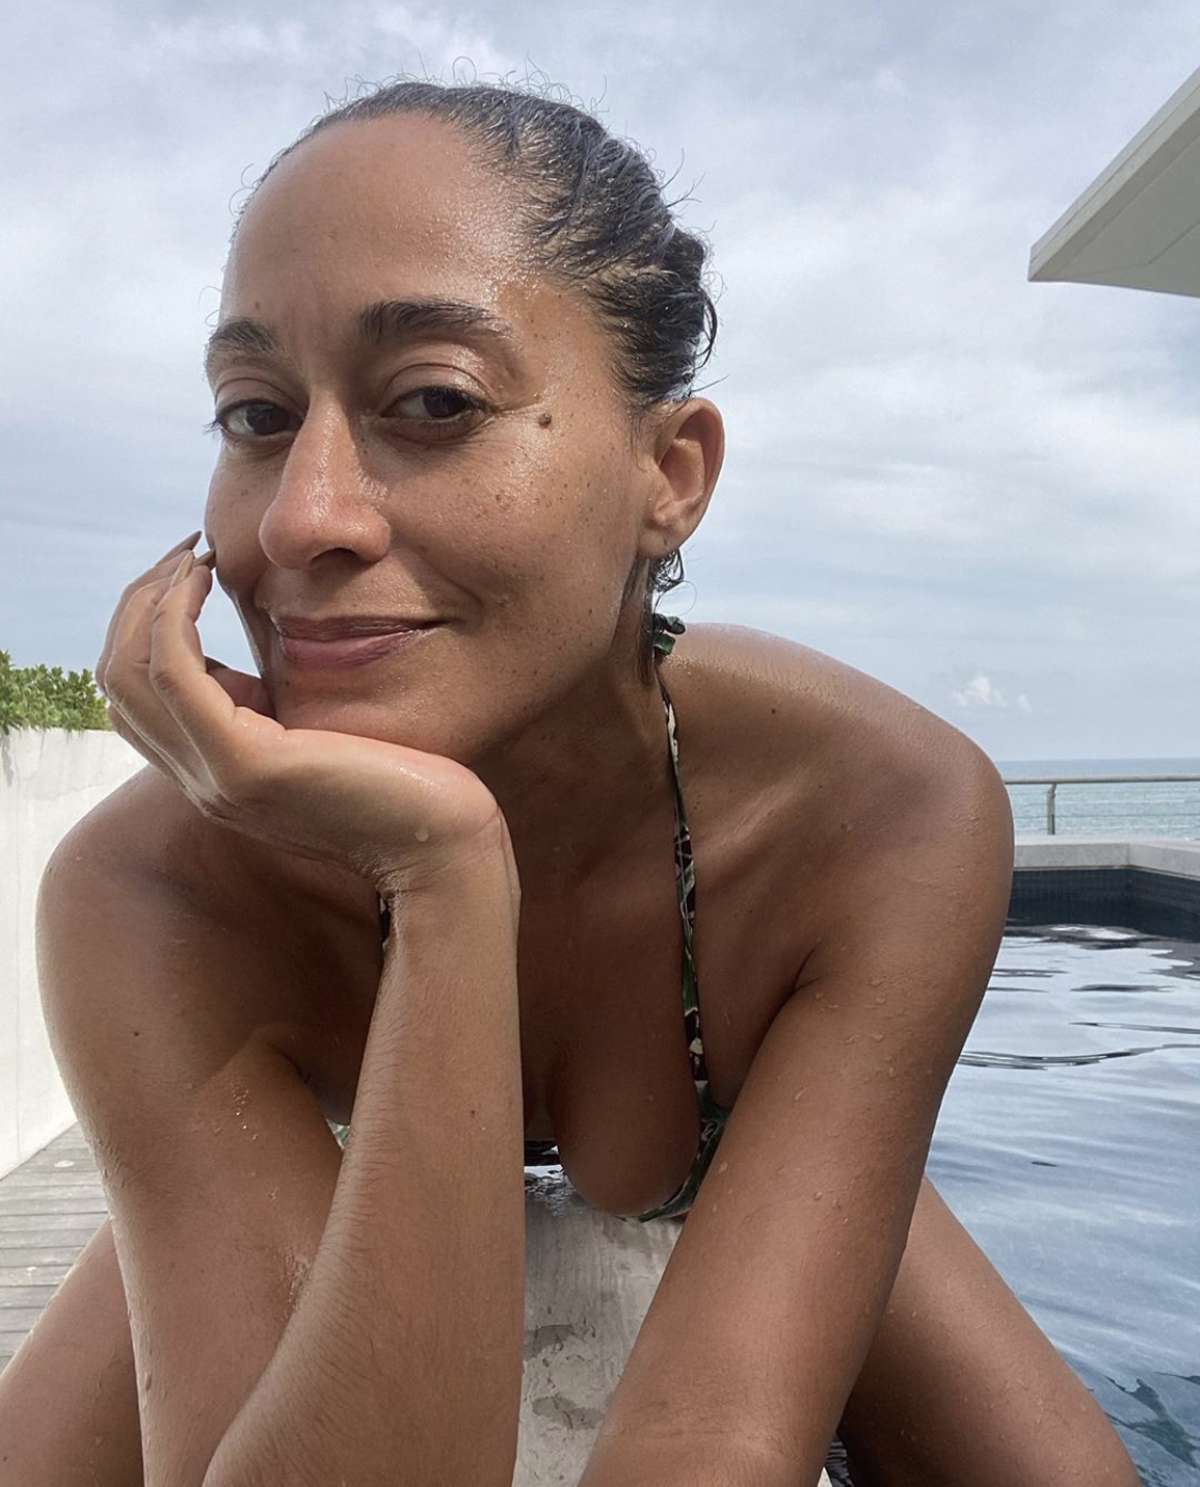 Her Body Was Perfect Before': Tracee Ellis Ross Speaks Out About Alter...